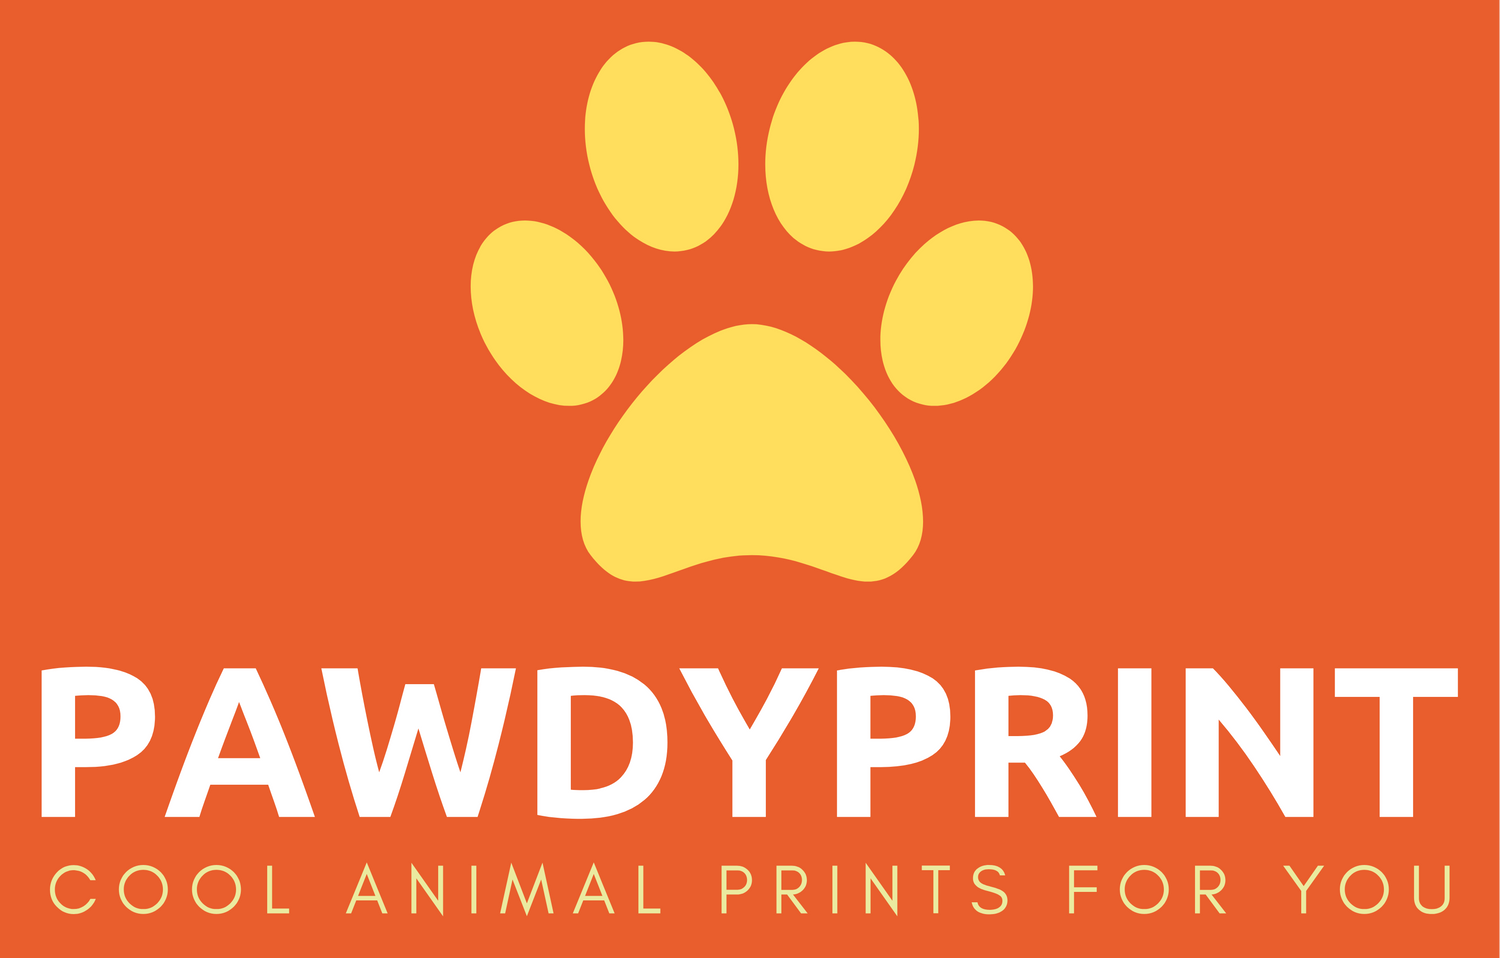 About Pawdyprint